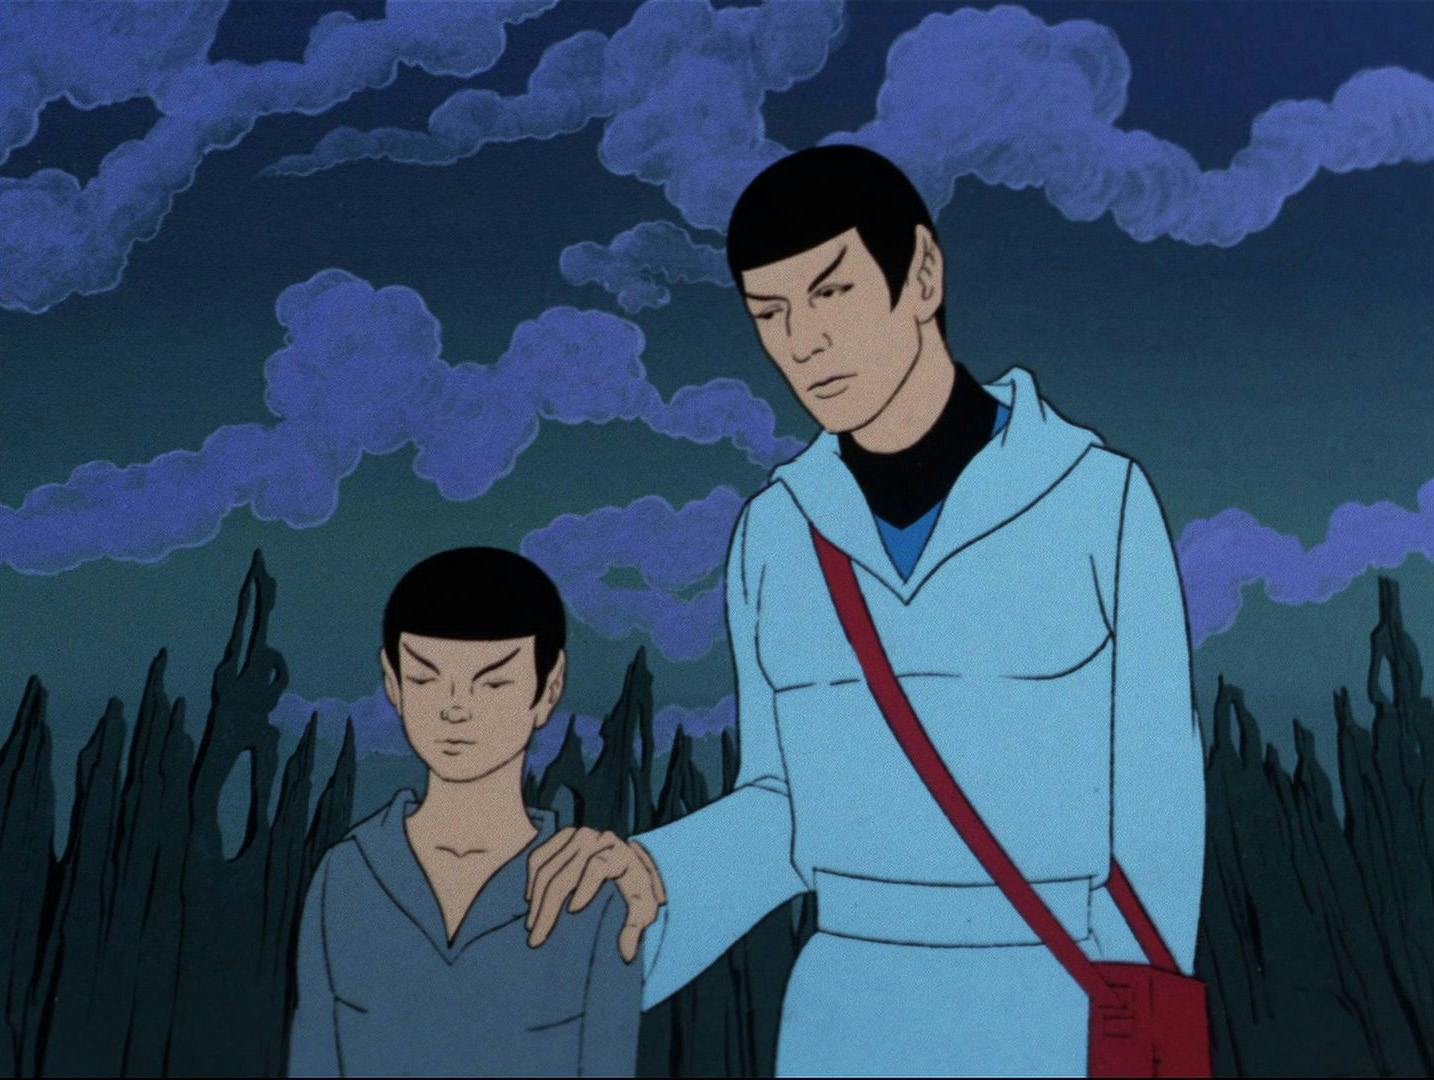 Adult Spock plays his hand on the shoulder of young Spock who is grieving the state of I-Chaya, their beloved pet sehlat in 'Yesteryear'